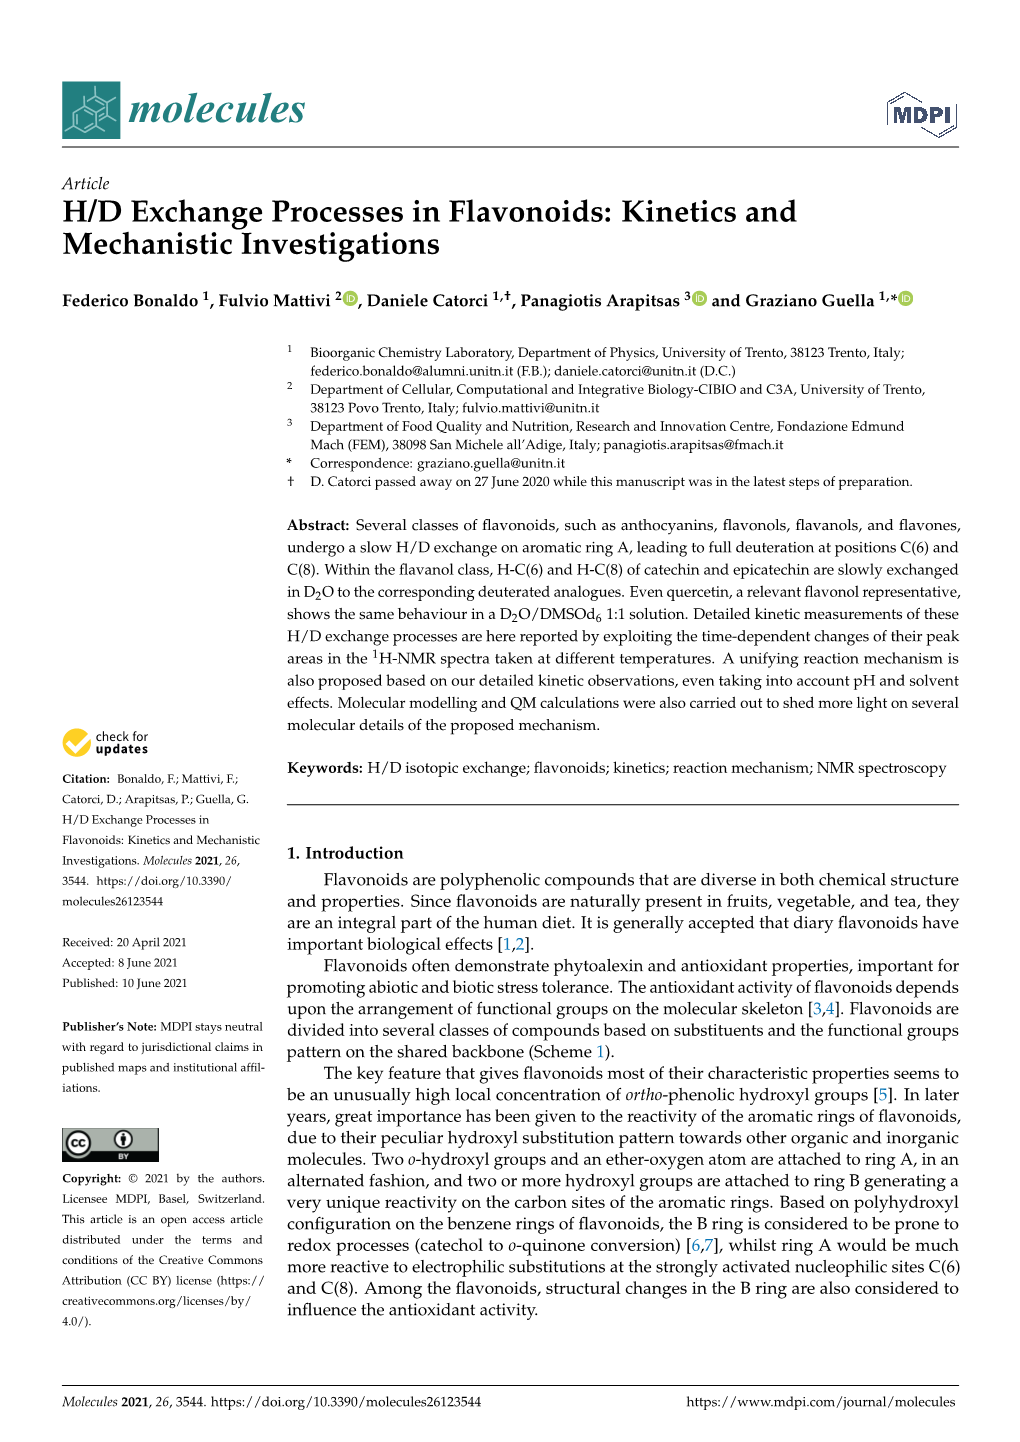 H/D Exchange Processes in Flavonoids: Kinetics and Mechanistic Investigations